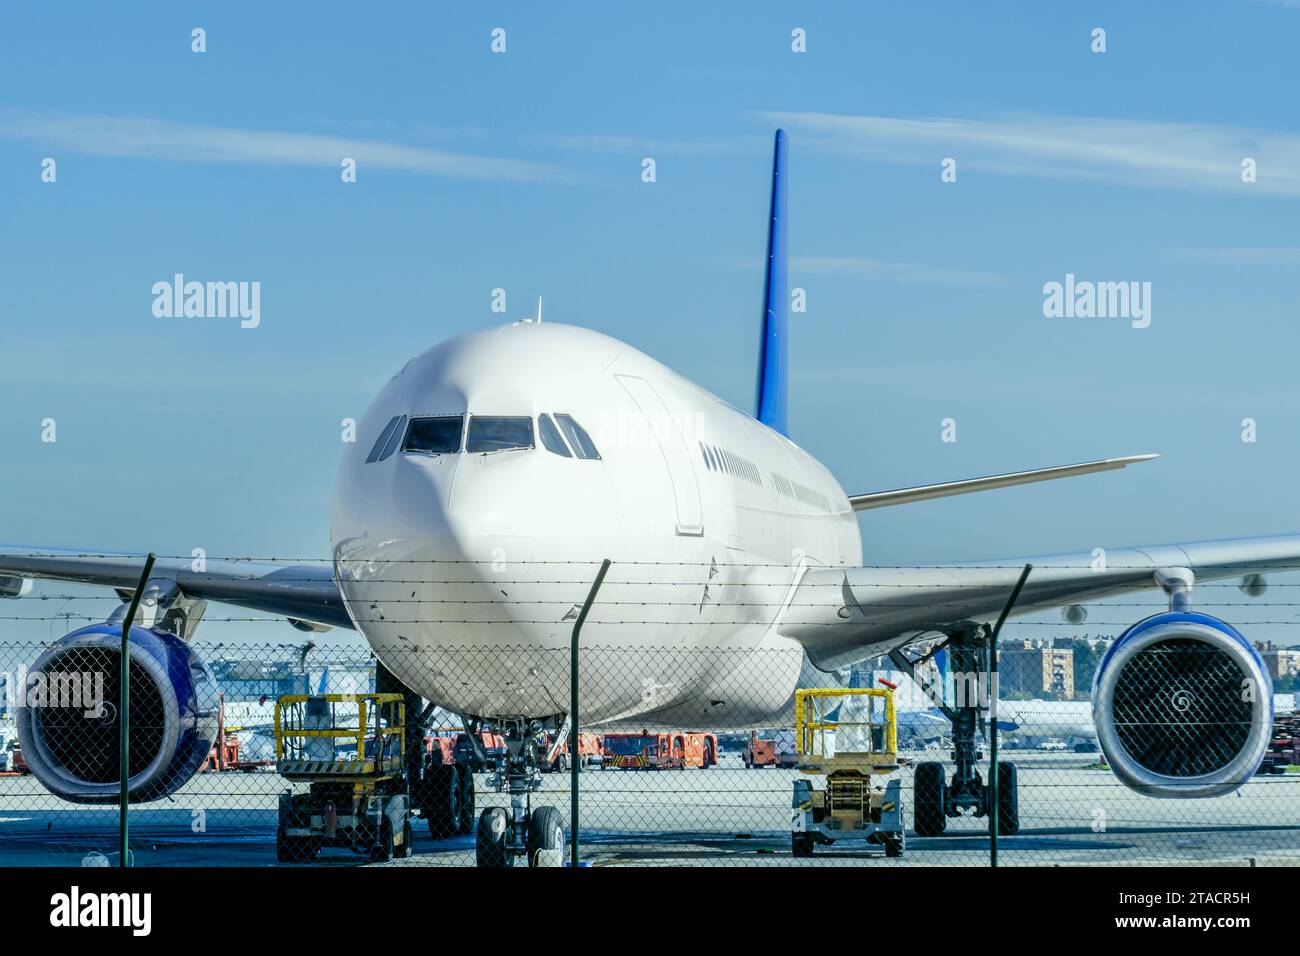 An airplane loads on the runway receiving inspection Stock Photo